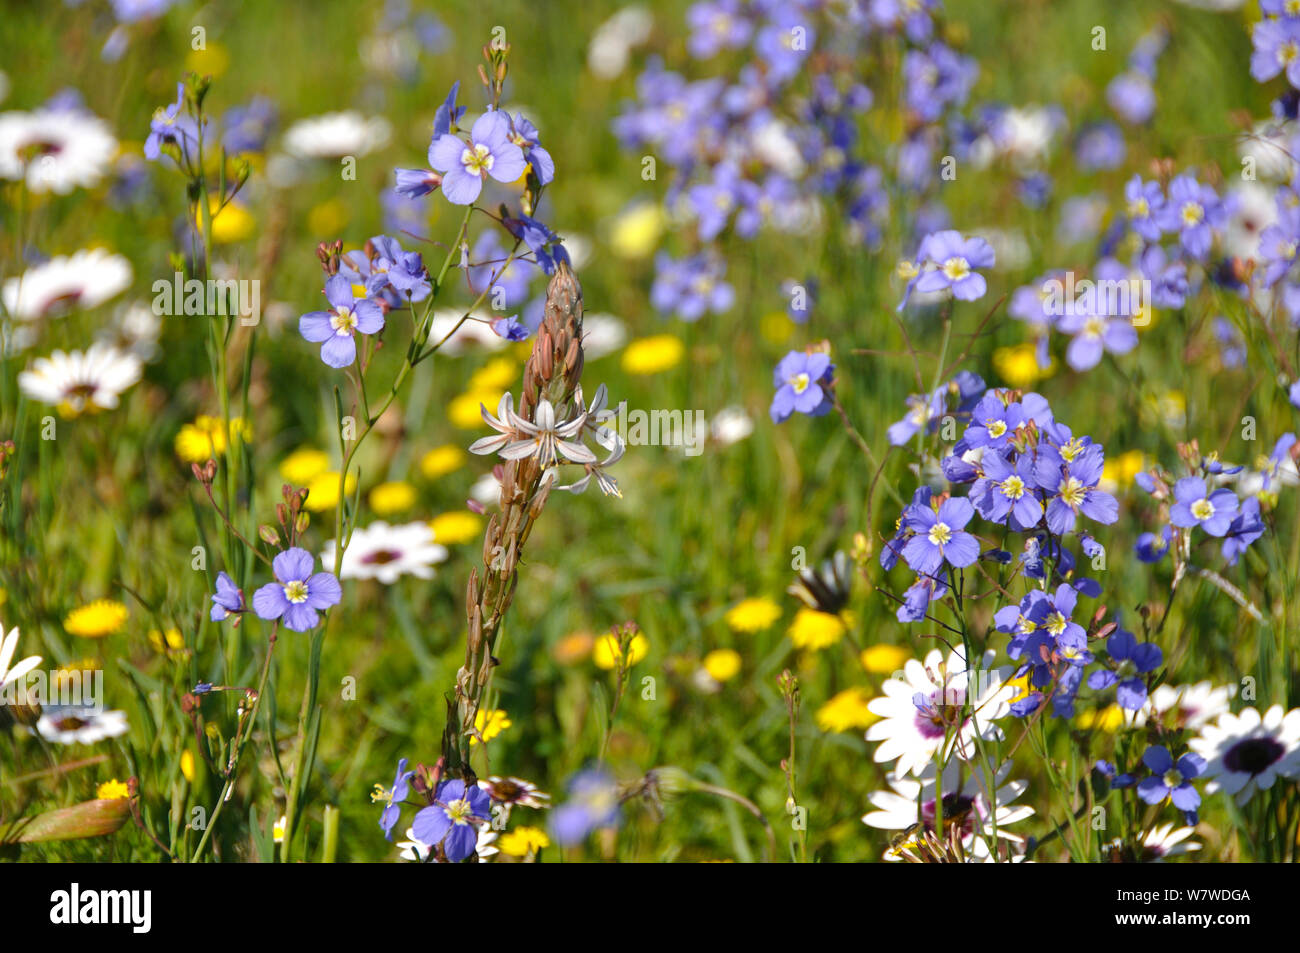 Namaqualand flowers including Sporries (Heliophila sp), White Namaqualand / Cape daisies (Dimorphotheca pluvialis) and Flowering bulb (Drimia multifolia) West Coast National Park, Western Cape, South Africa:, August. Stock Photo